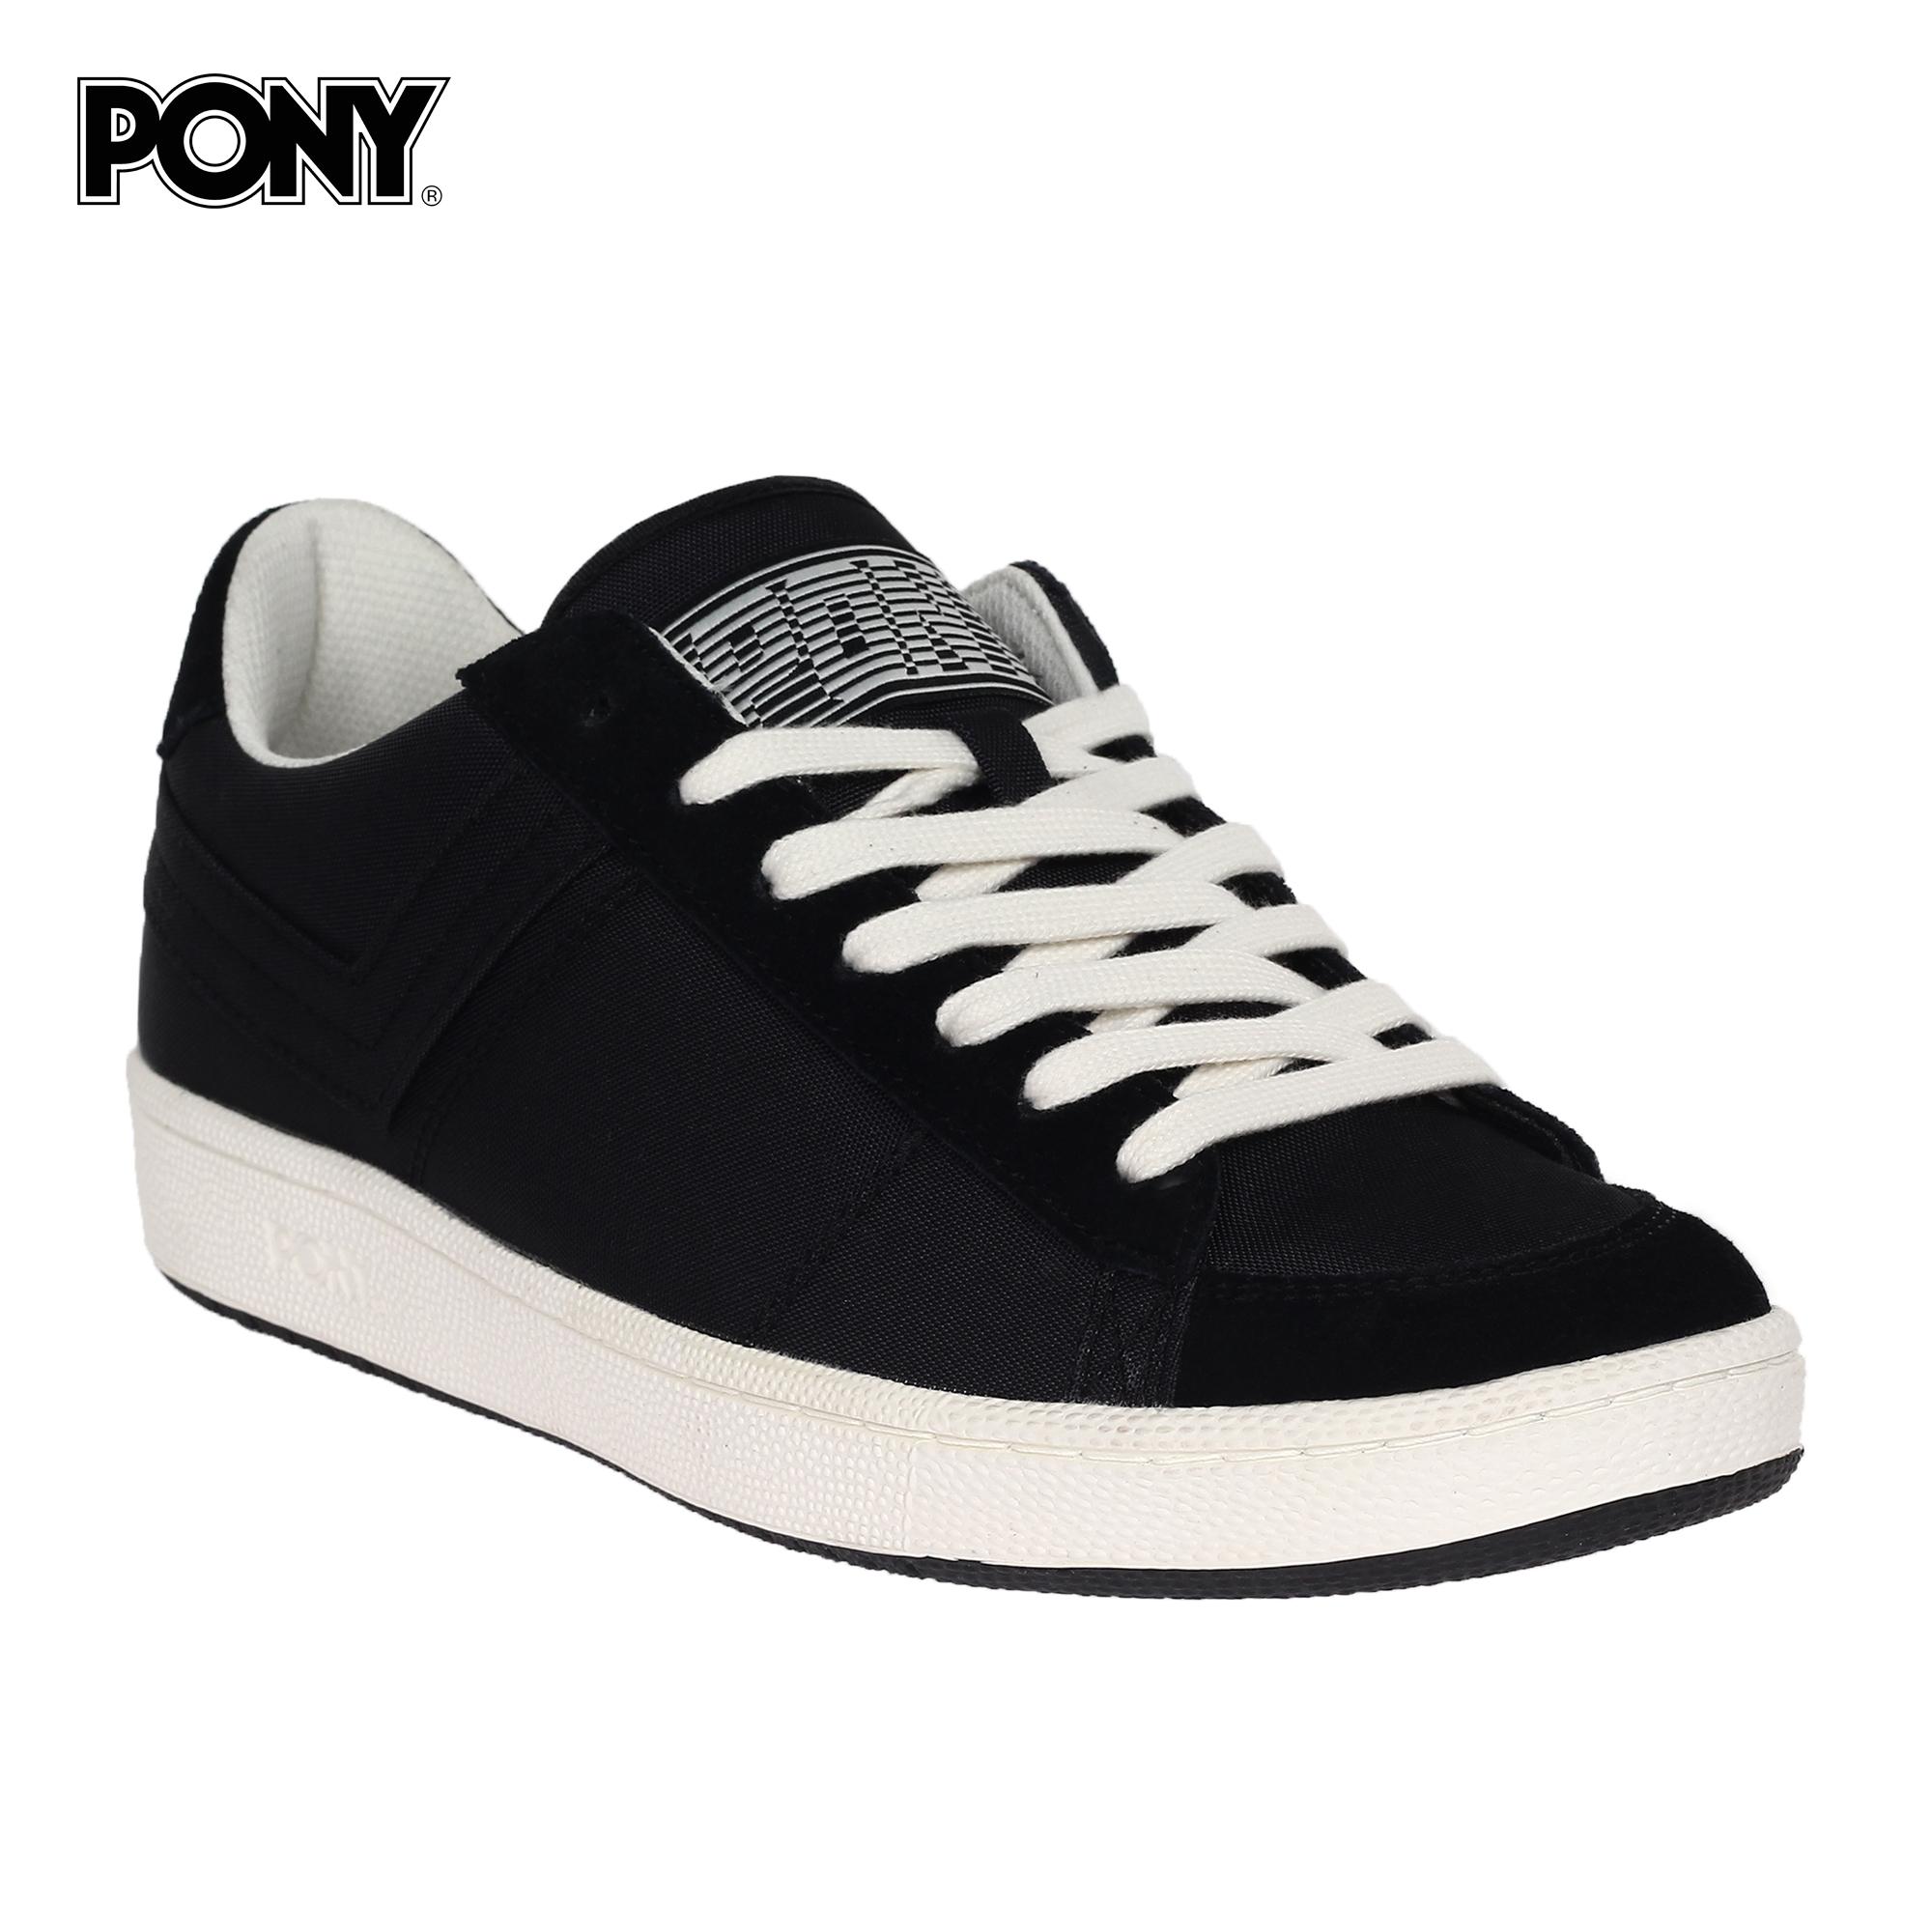 pony shoes black and white